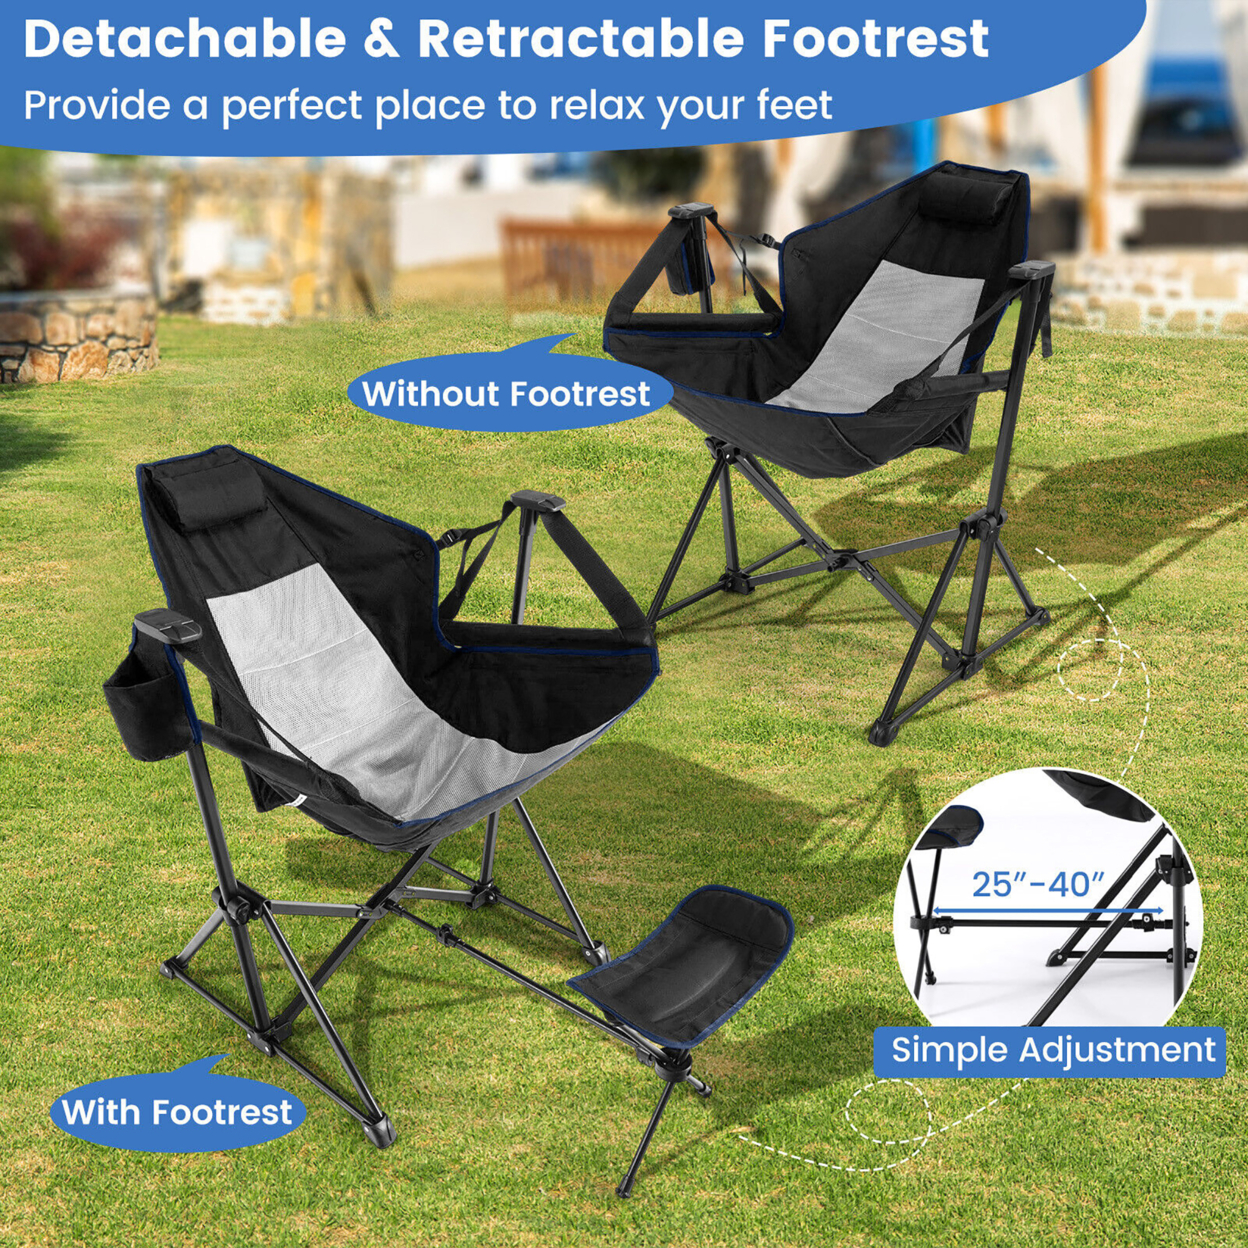 Hammock Camping Chair W/ Retractable Footrest & Carrying Bag For Camping Picnic - Black